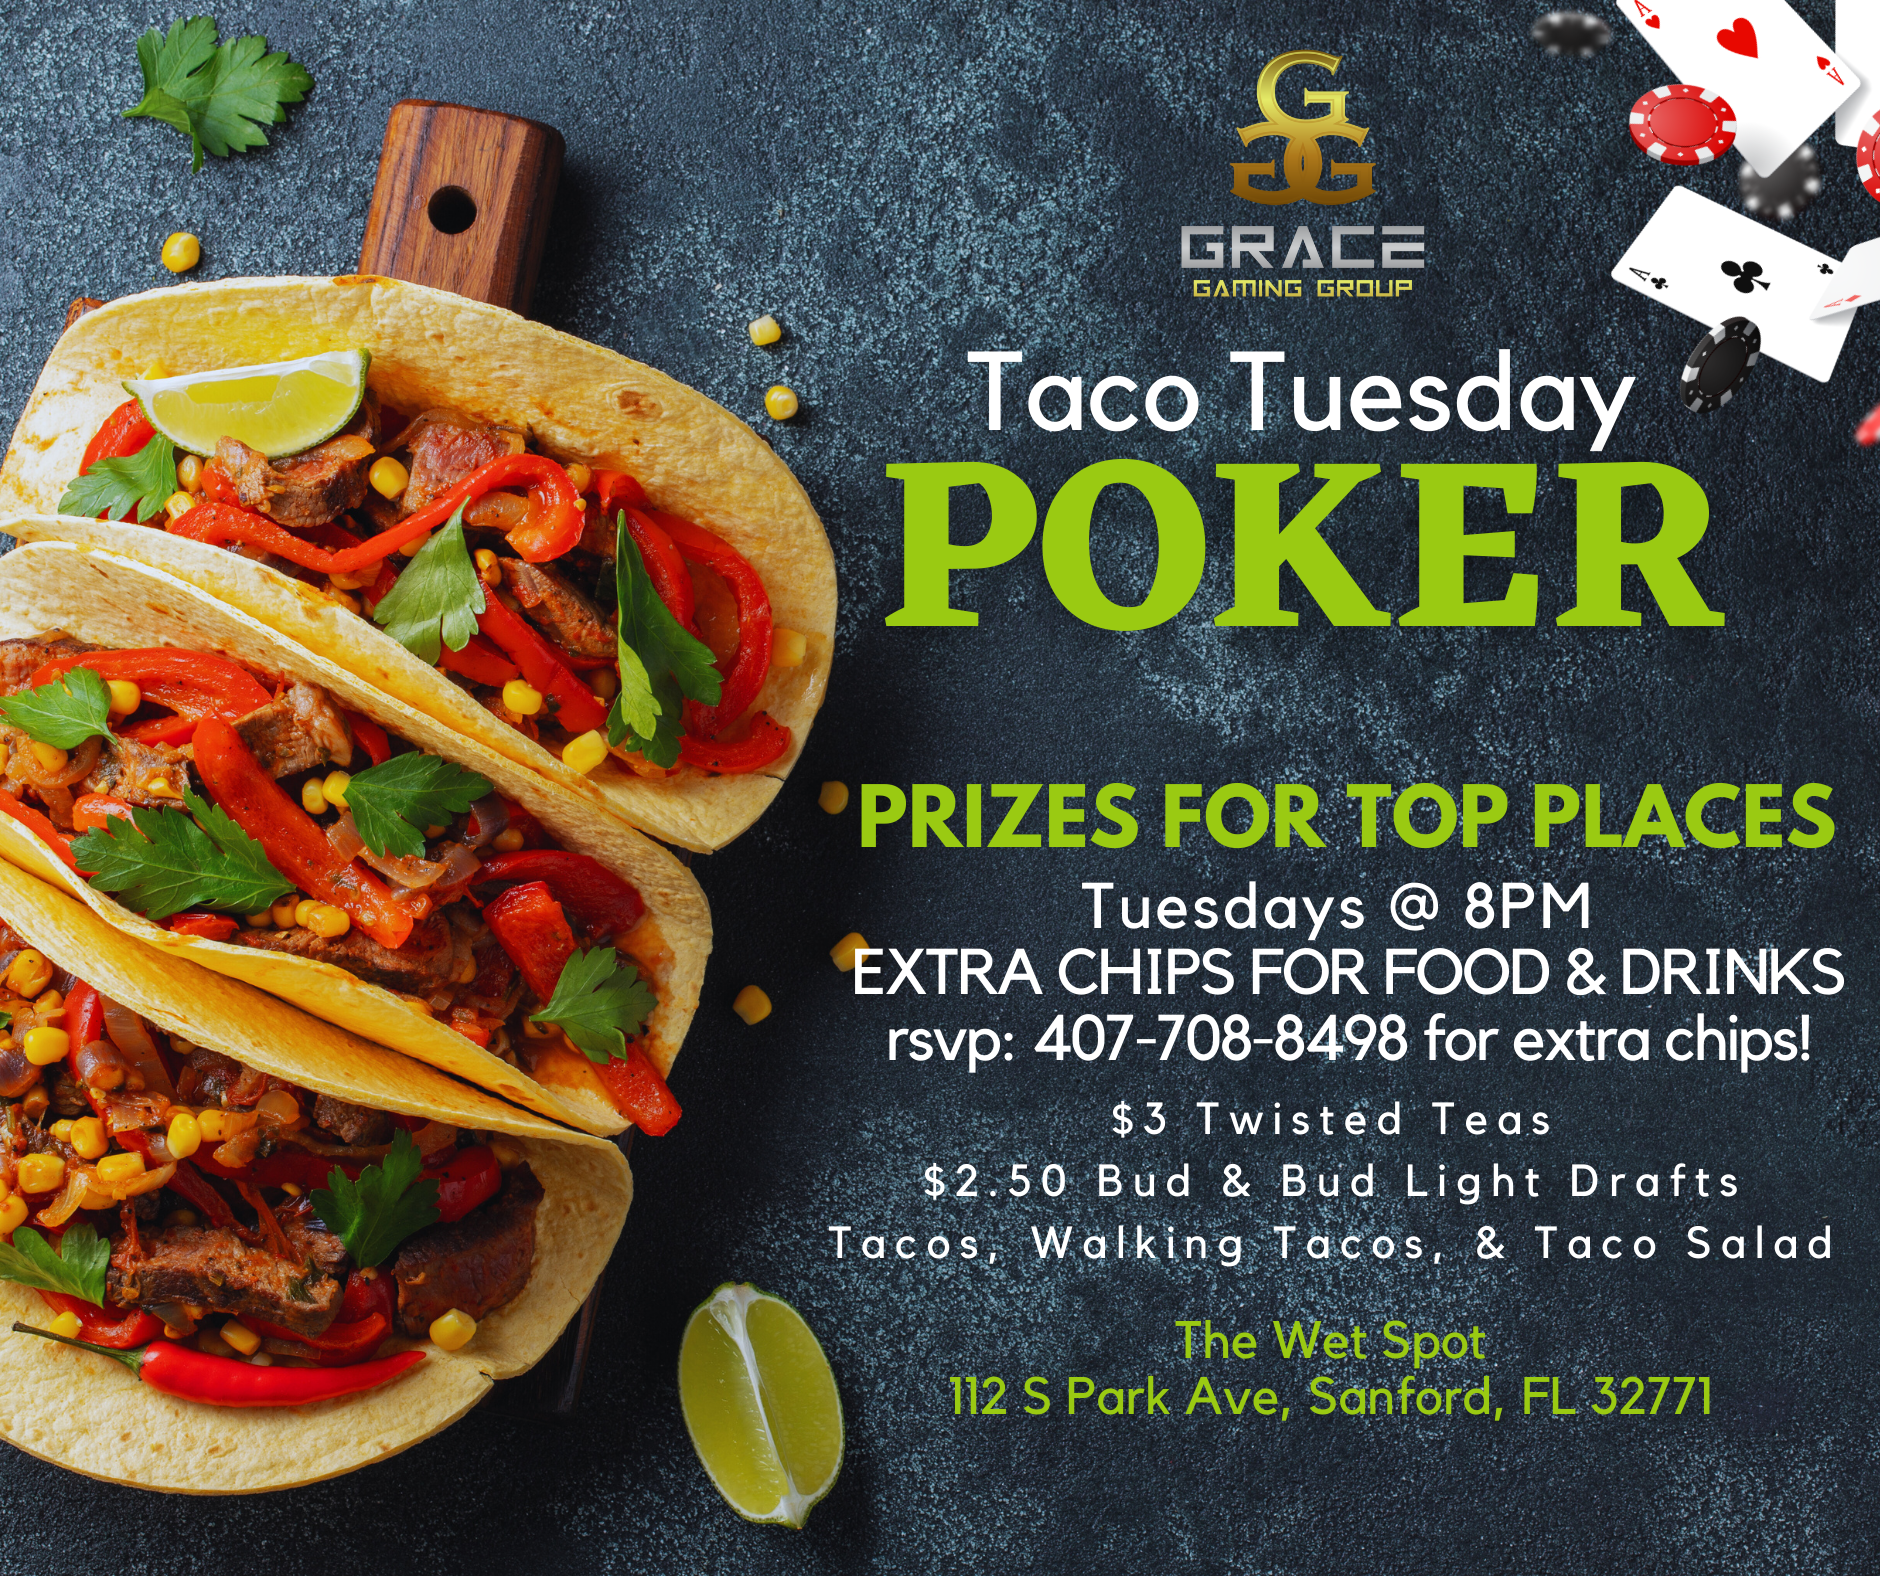 An advertisement for taco tuesday poker with a picture of tacos